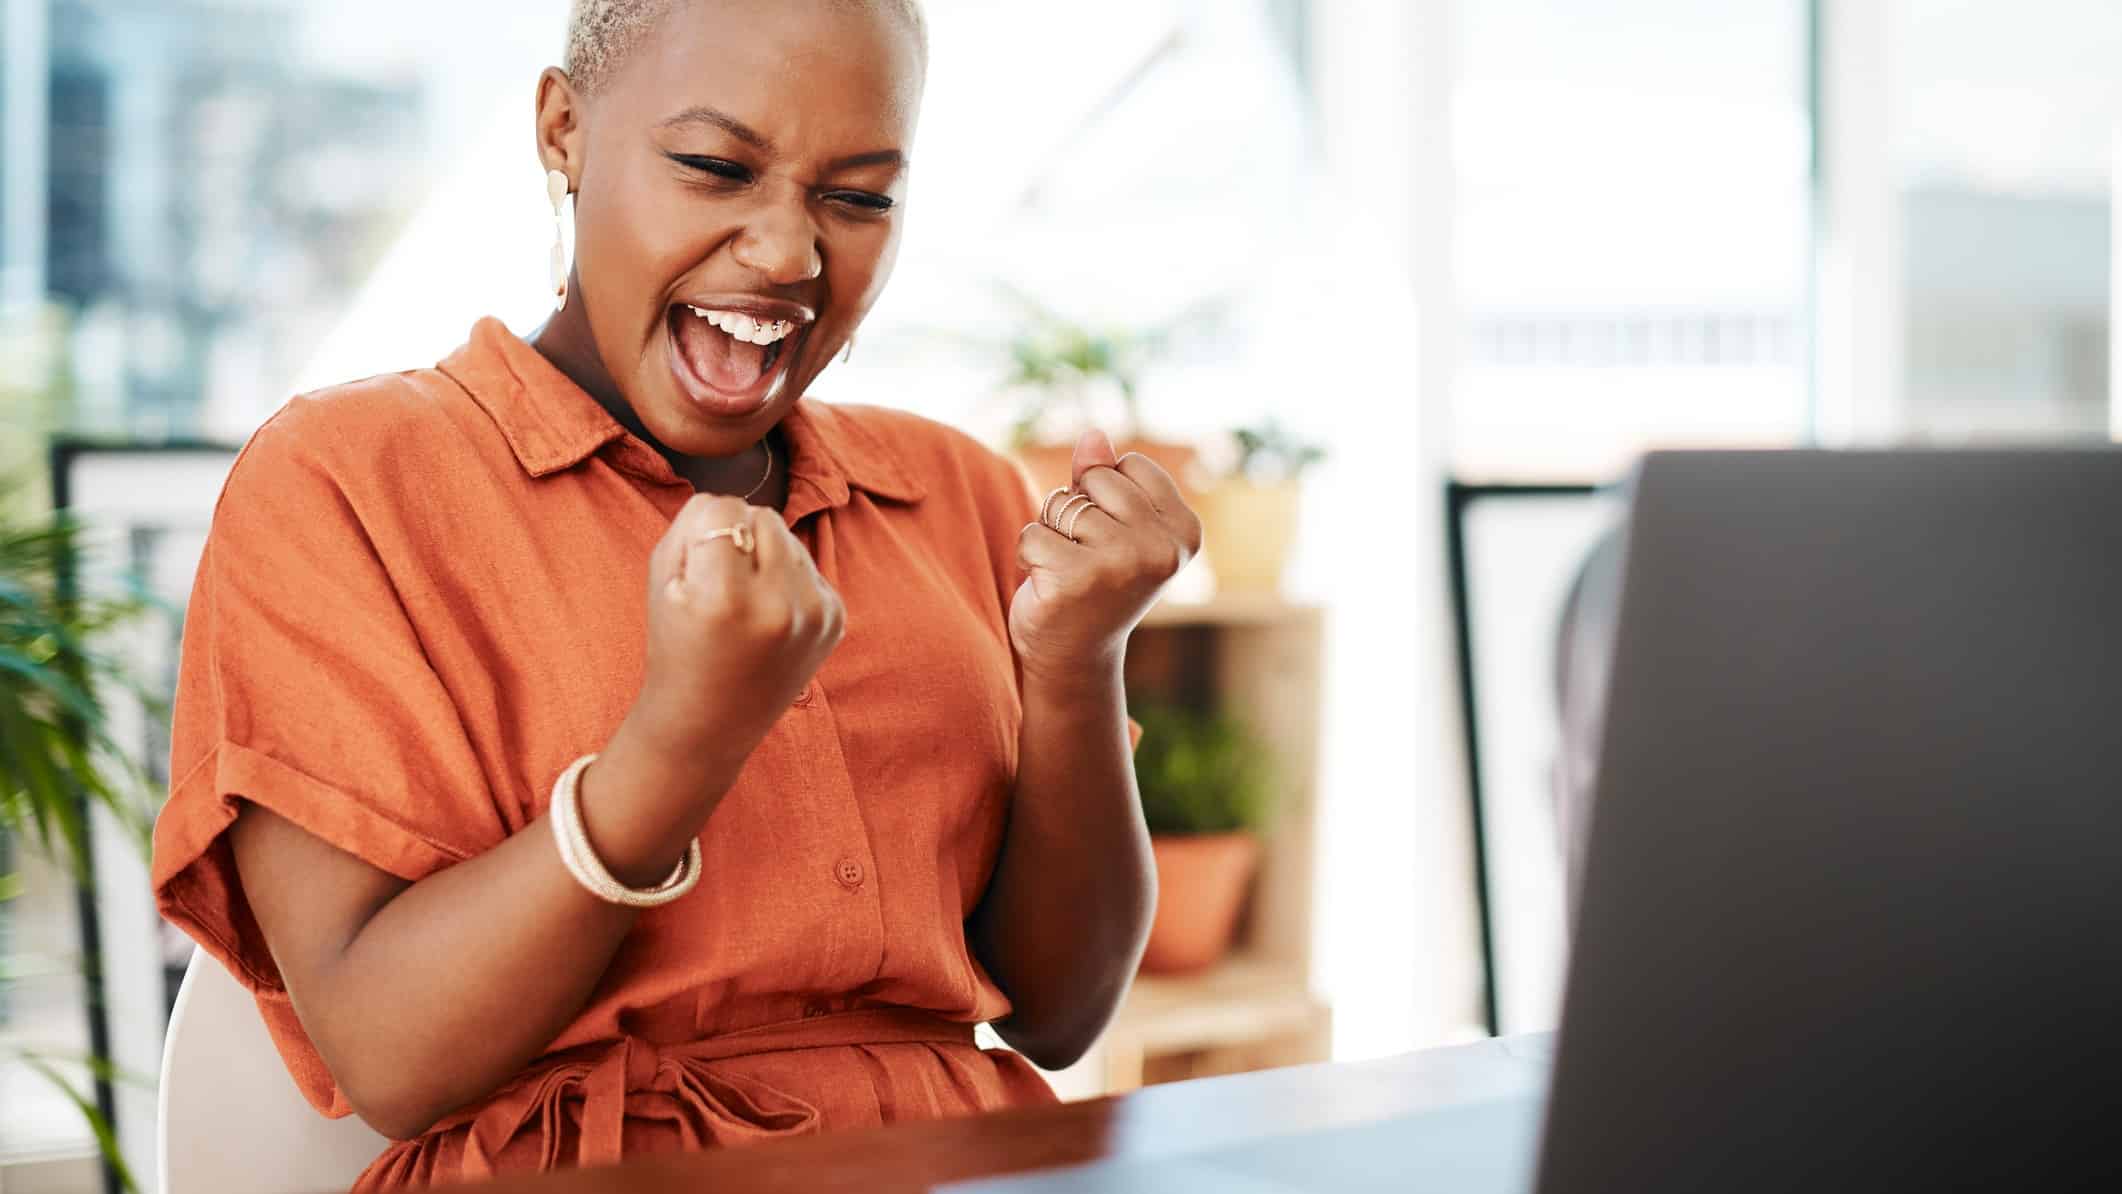 A young women pumps her fists in excitement after seeing some good news on her laptop.